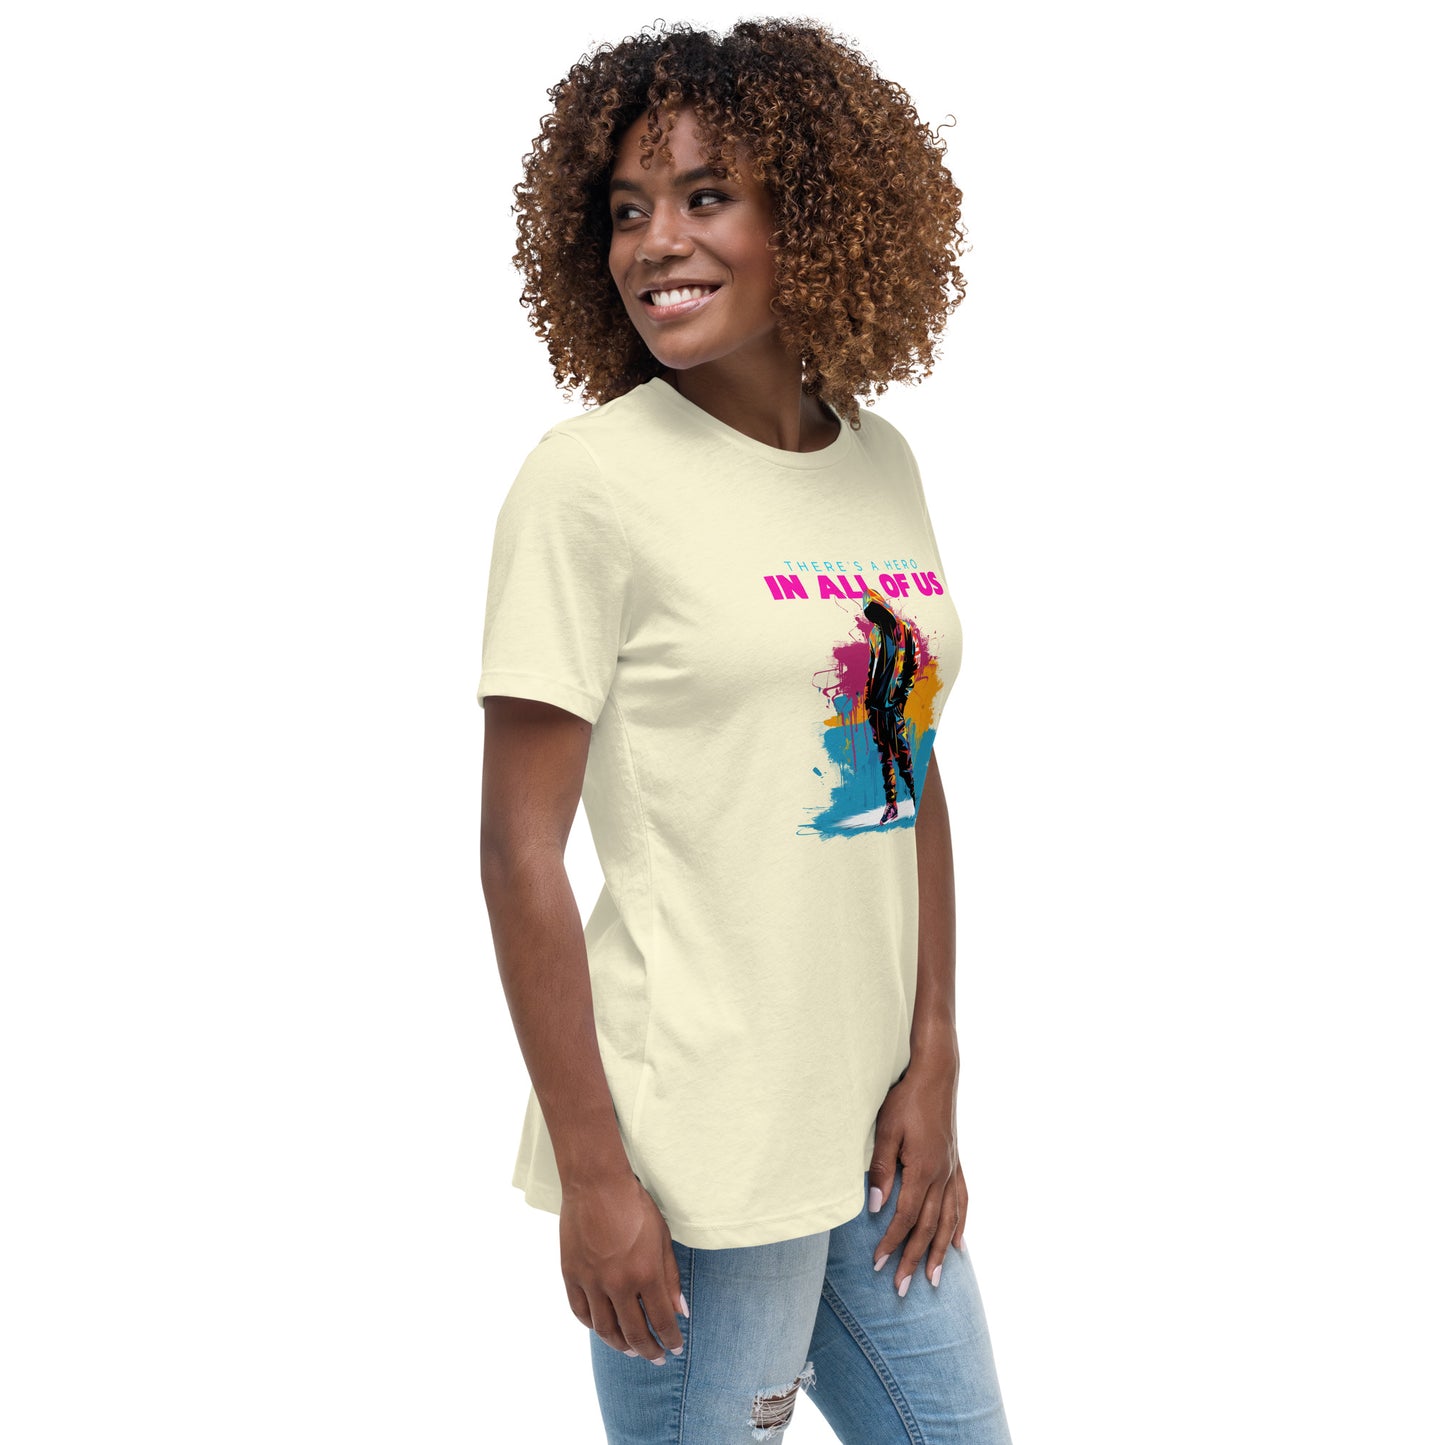 "There's a Hero in all of us"  Women's Relaxed T-Shirt